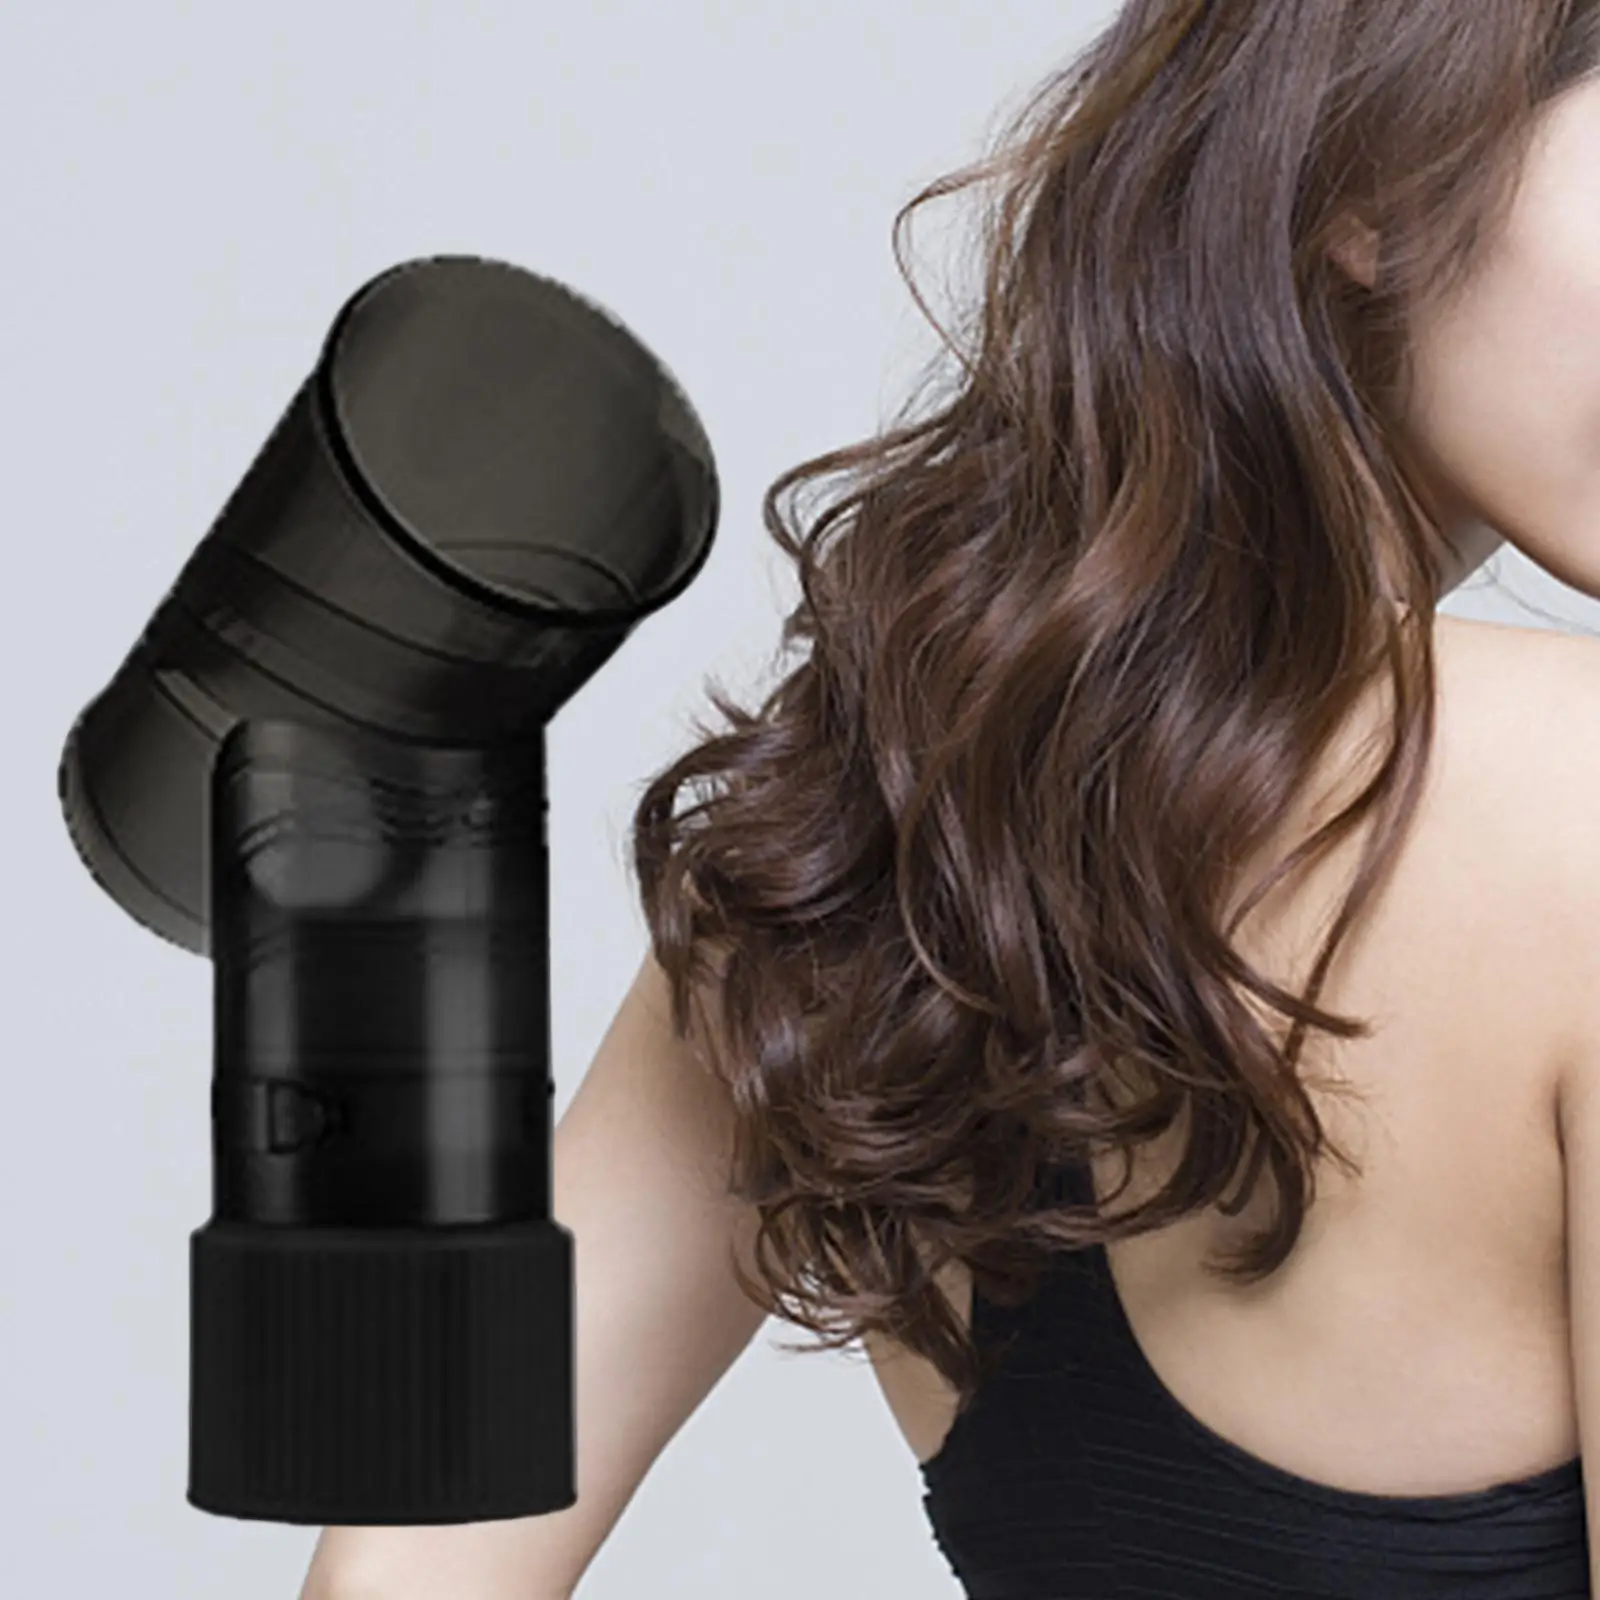 Hair Diffuser Hair Dryer Blower Accessory Fasting Easy to Operate